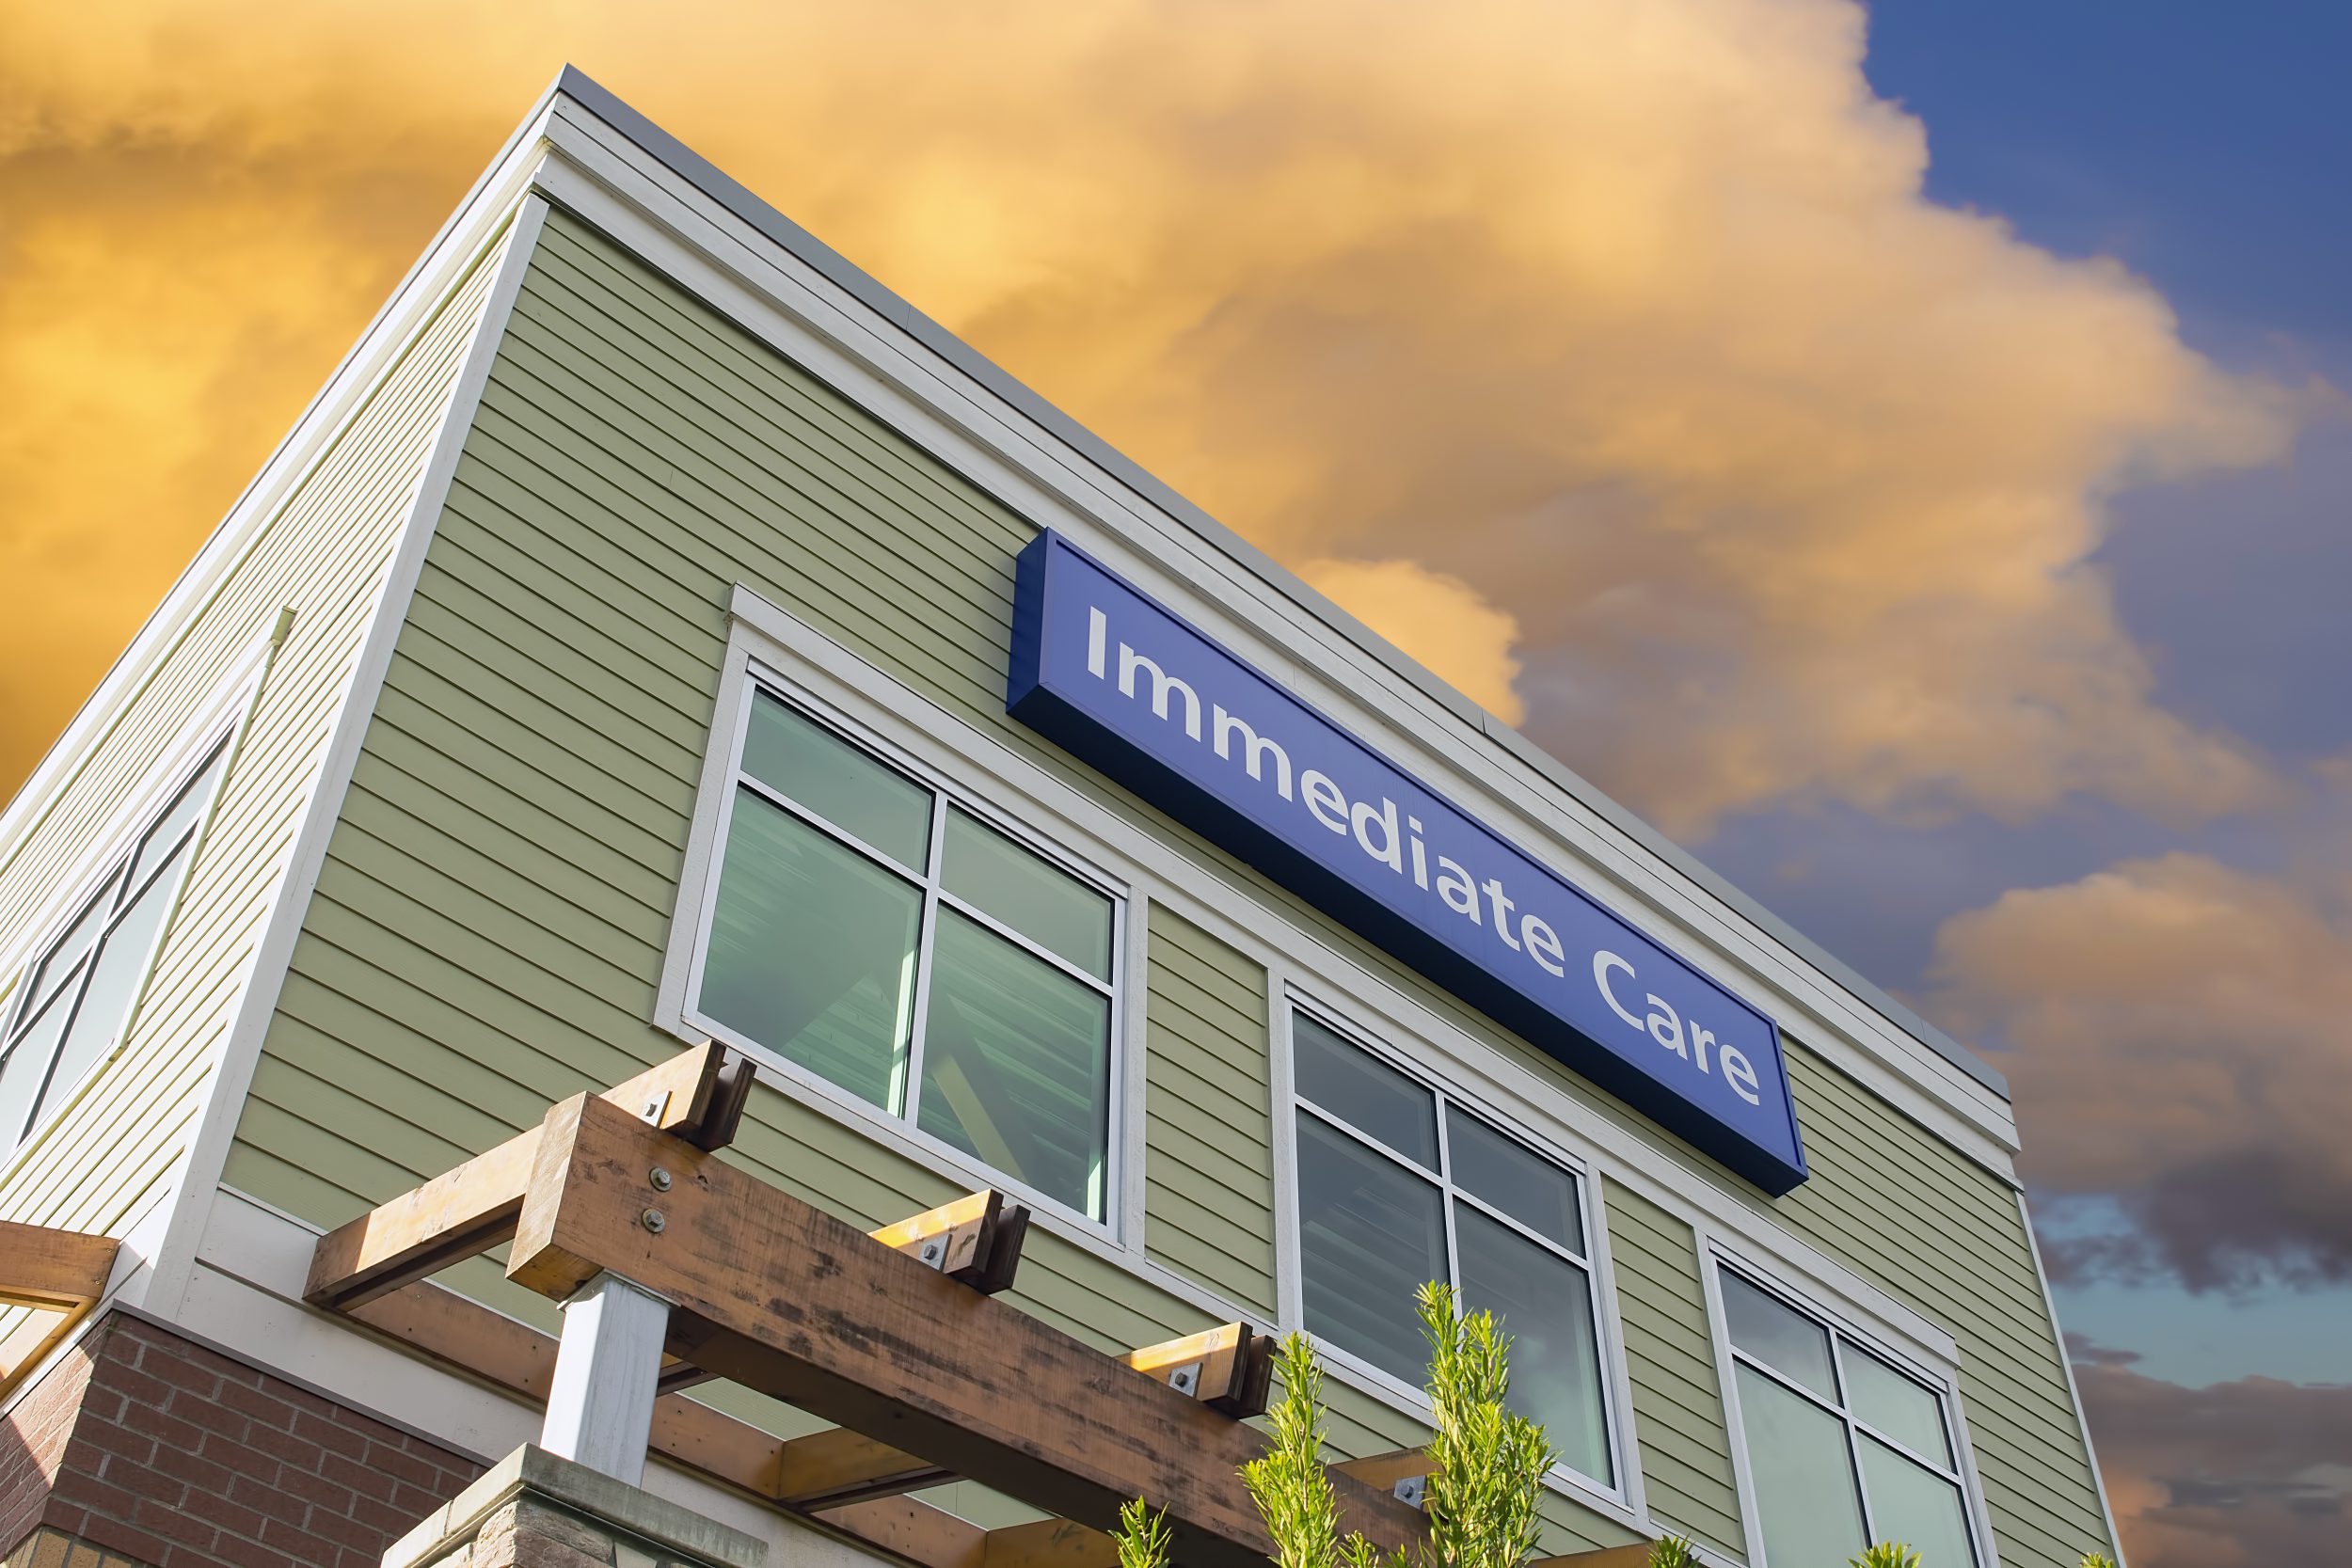 Immediate Care Sign Above Windows Outside Hospital or Emergency Clinic Building Against Sky with Clouds